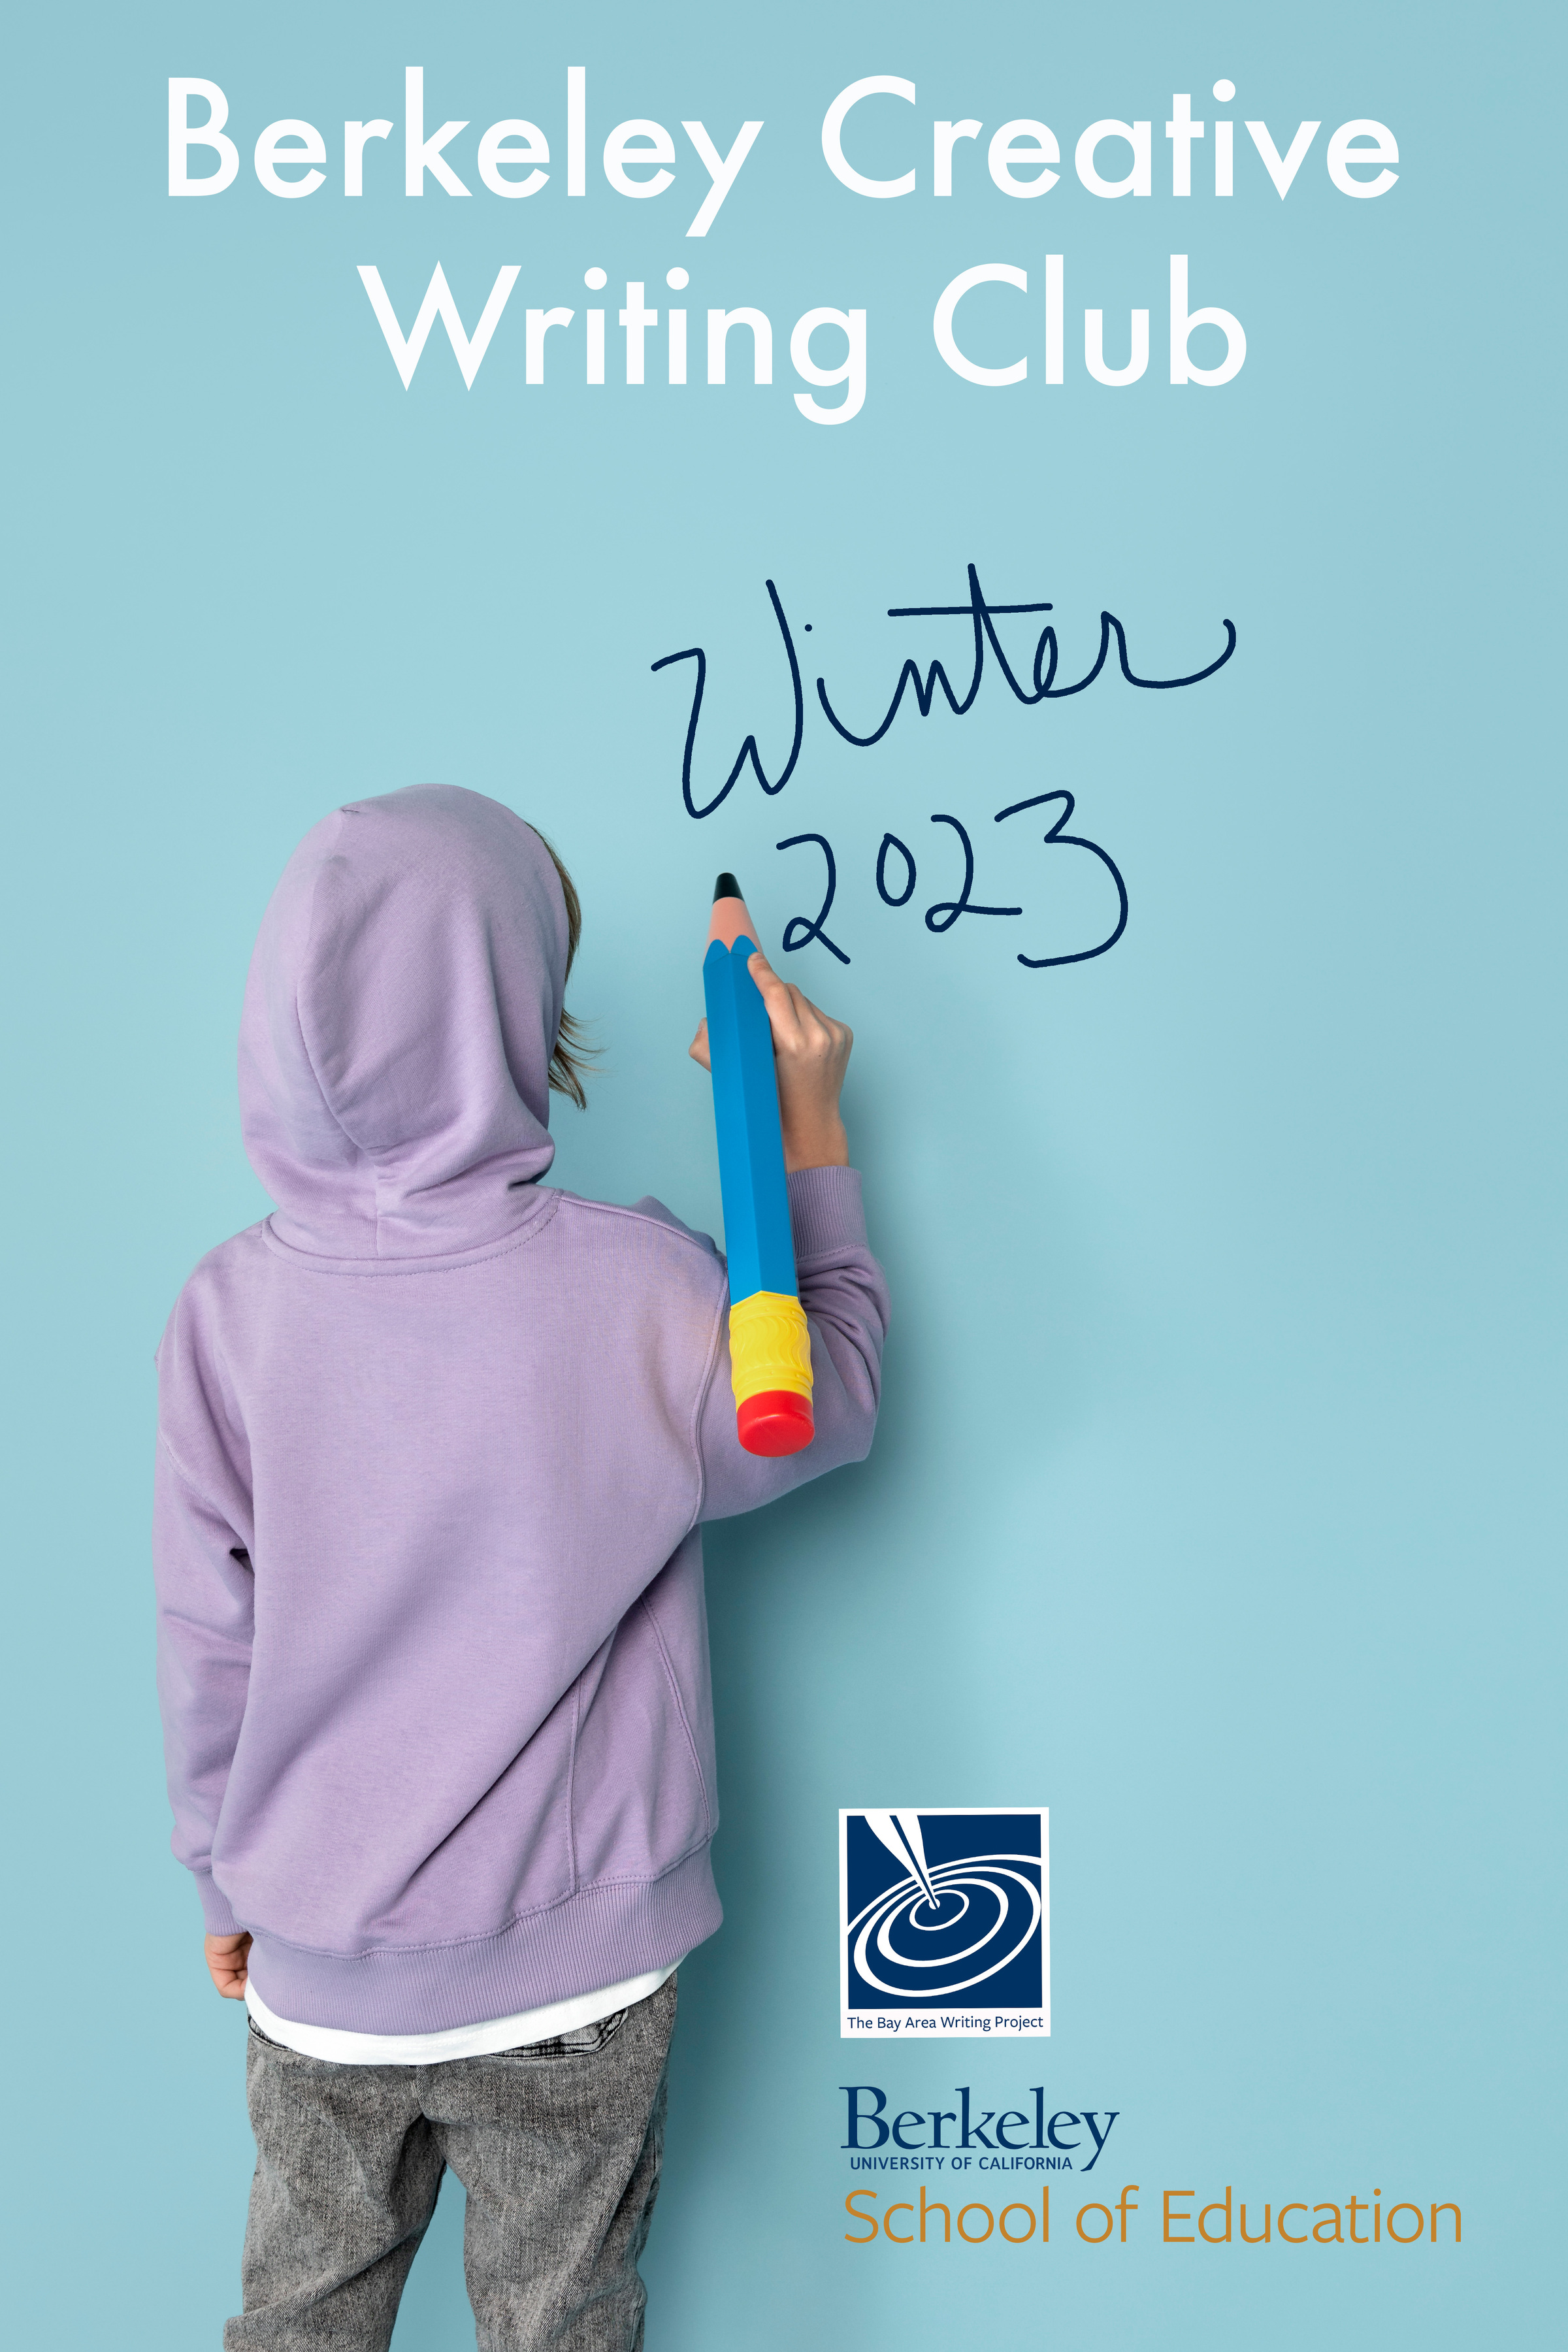 Registration for Creative Writing Club (Winter/Spring 2023)